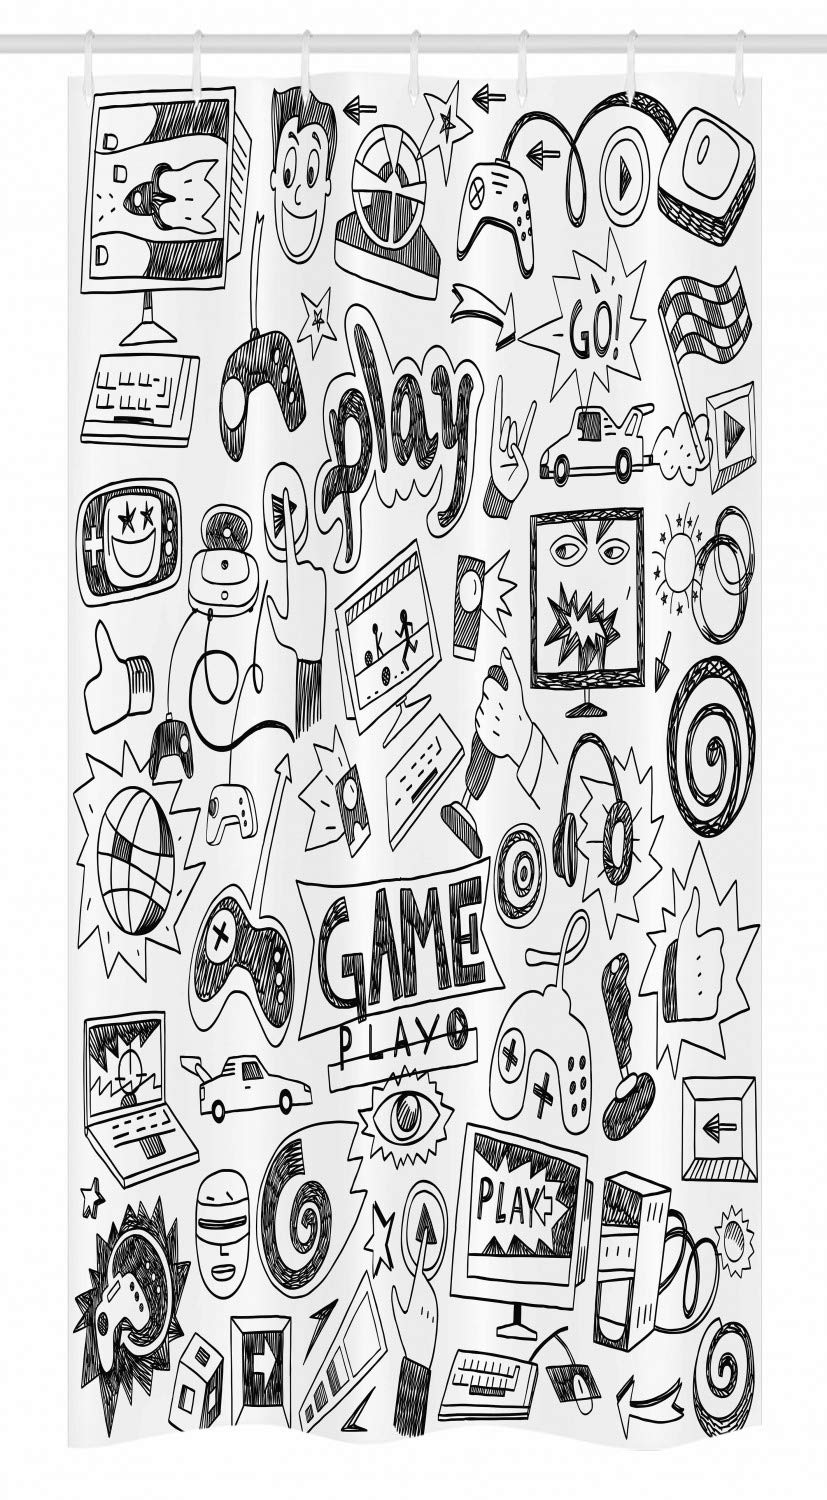 Ambesonne Video Games Stall Shower Curtain, Monochrome Sketch Style Gaming Design Racing Monitor Device Gadget Teen 90's, Fabric Bathroom Decor Set with Hooks, 36